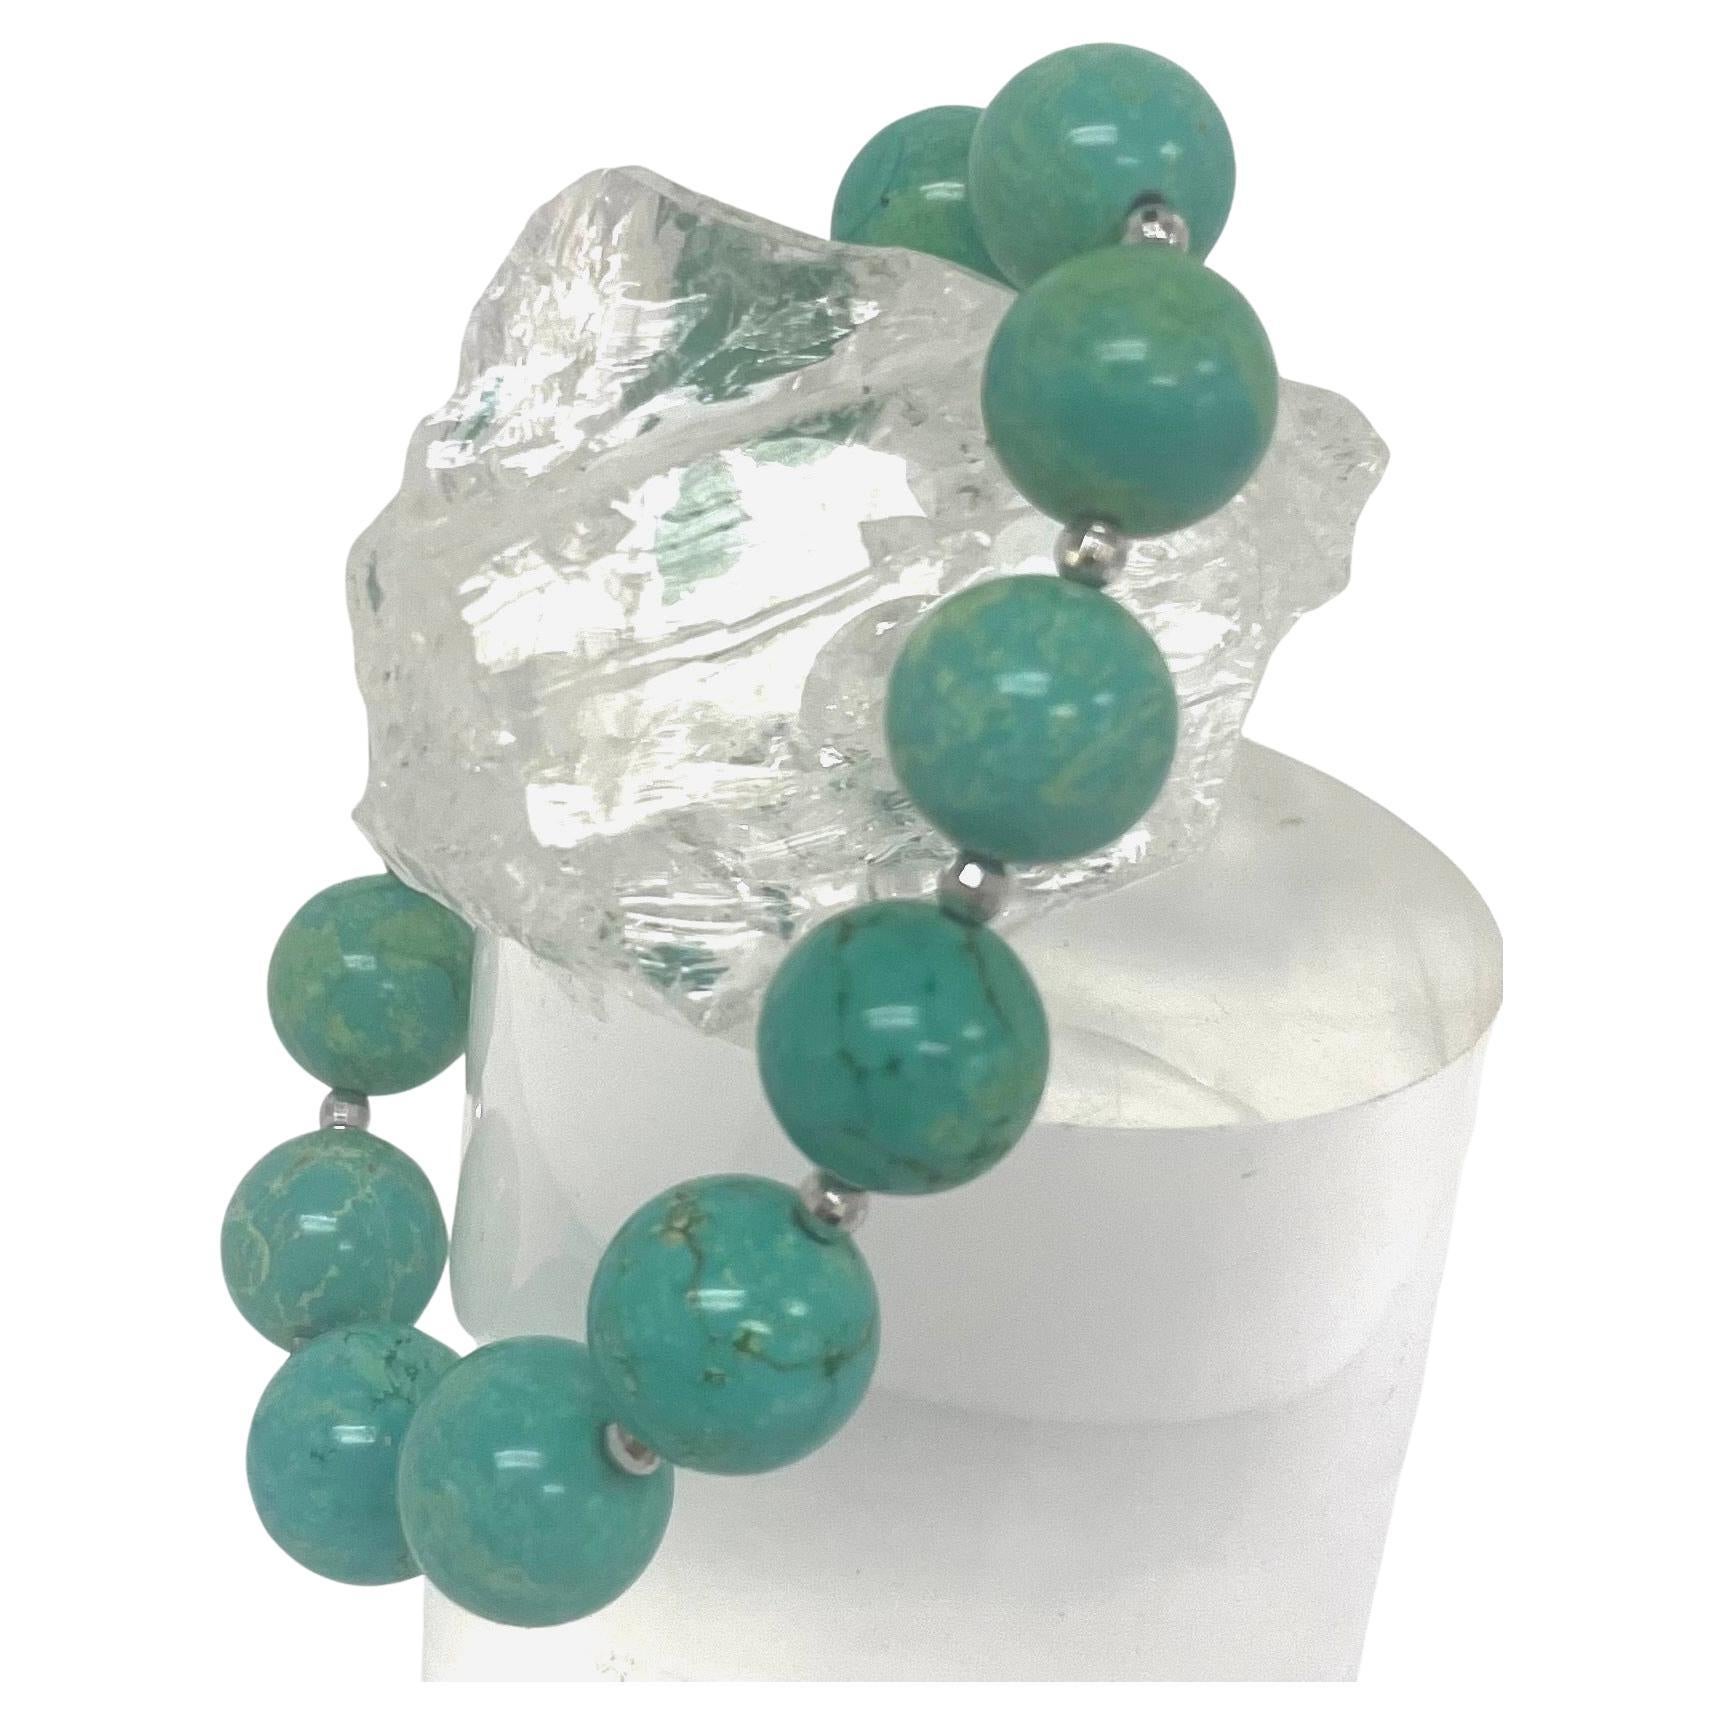 Description
Luscious green magnesite enhanced stretchy bracelet with 14k white gold faceted beads. Great for stacking. 
Item # B1275
Stack  it with item# B1269. (Sold separately).

Materials and Weight 
Green magnesite, 155cts, 13 pieces 12mm round